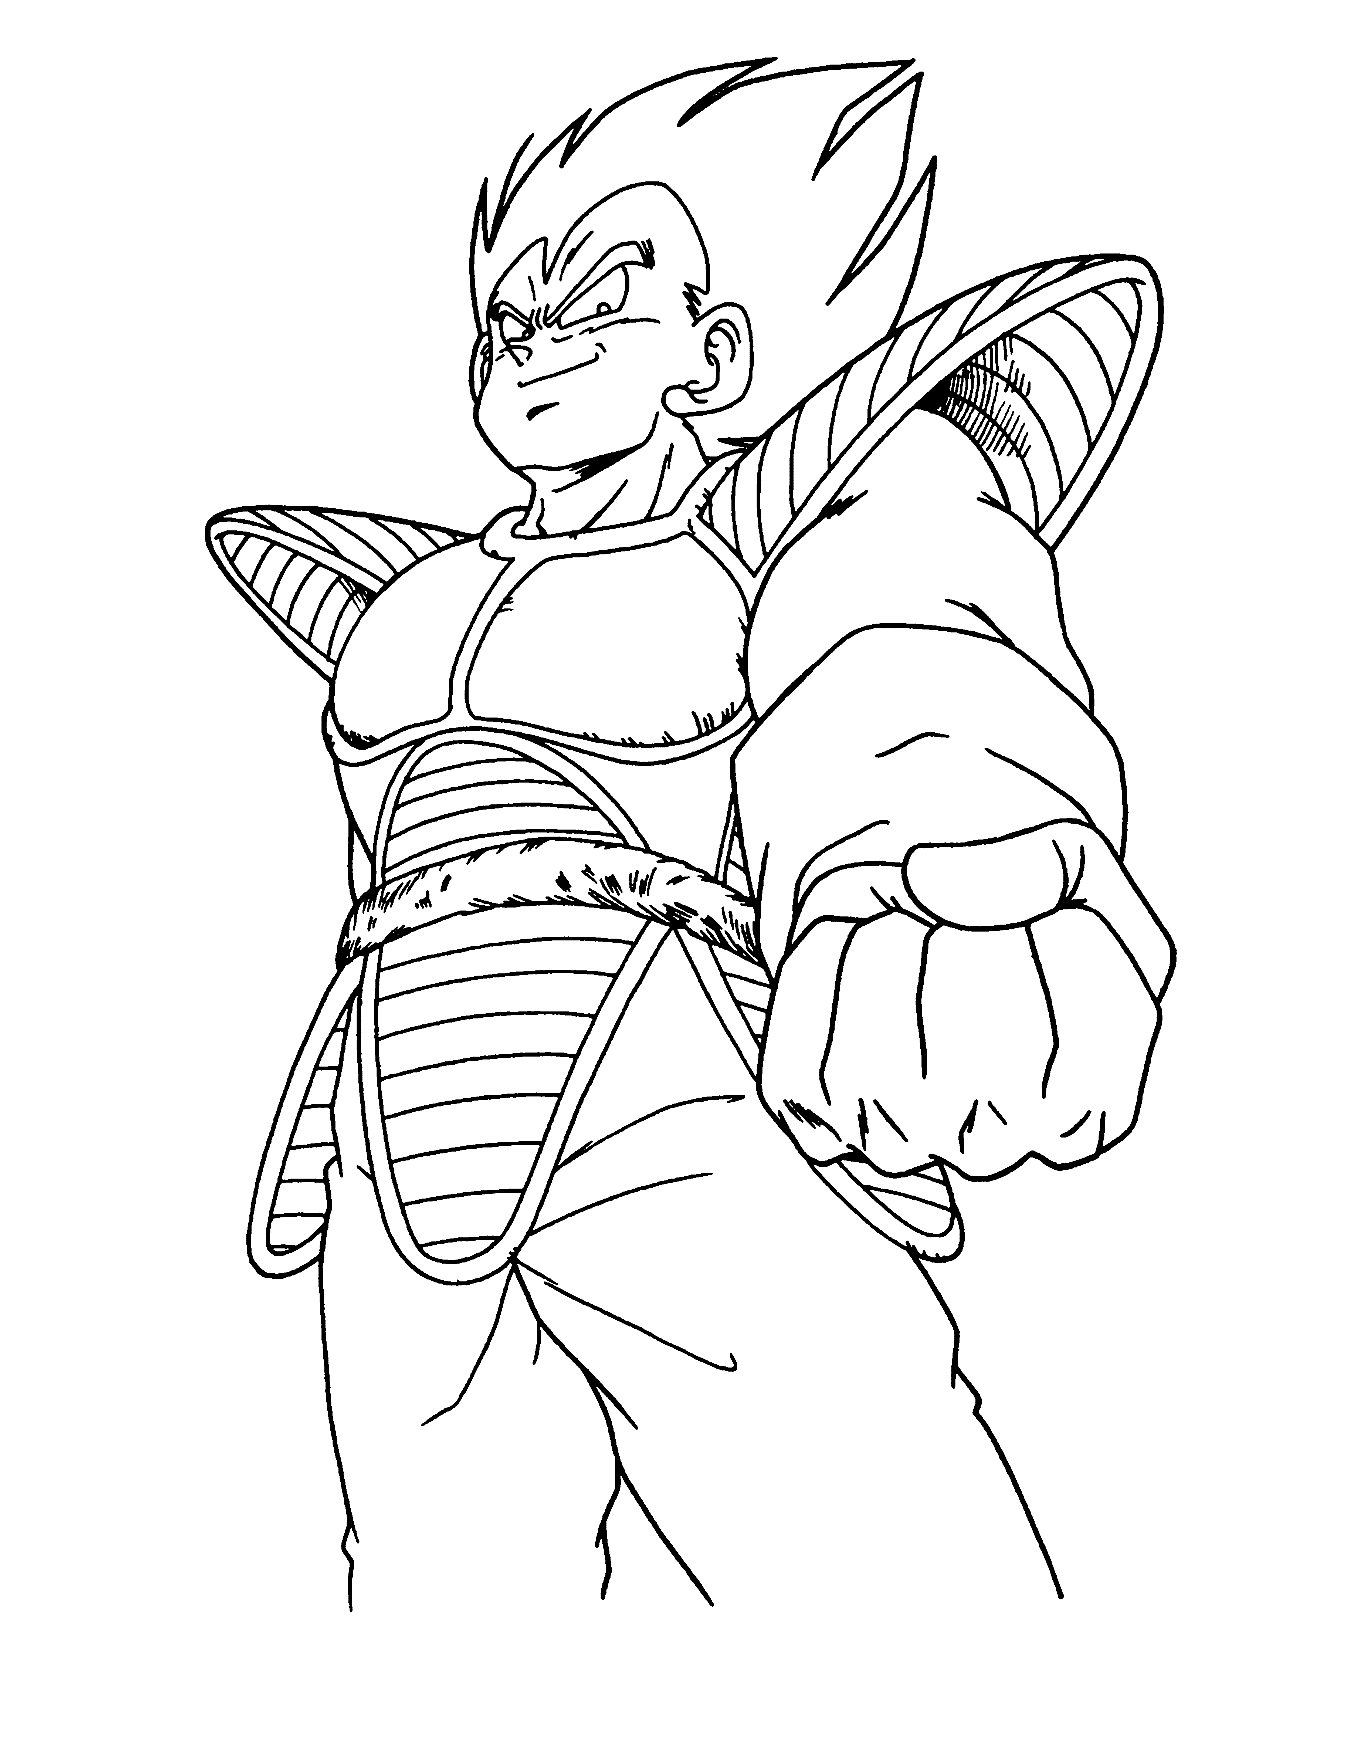 Strong Vegeta Coloring Page